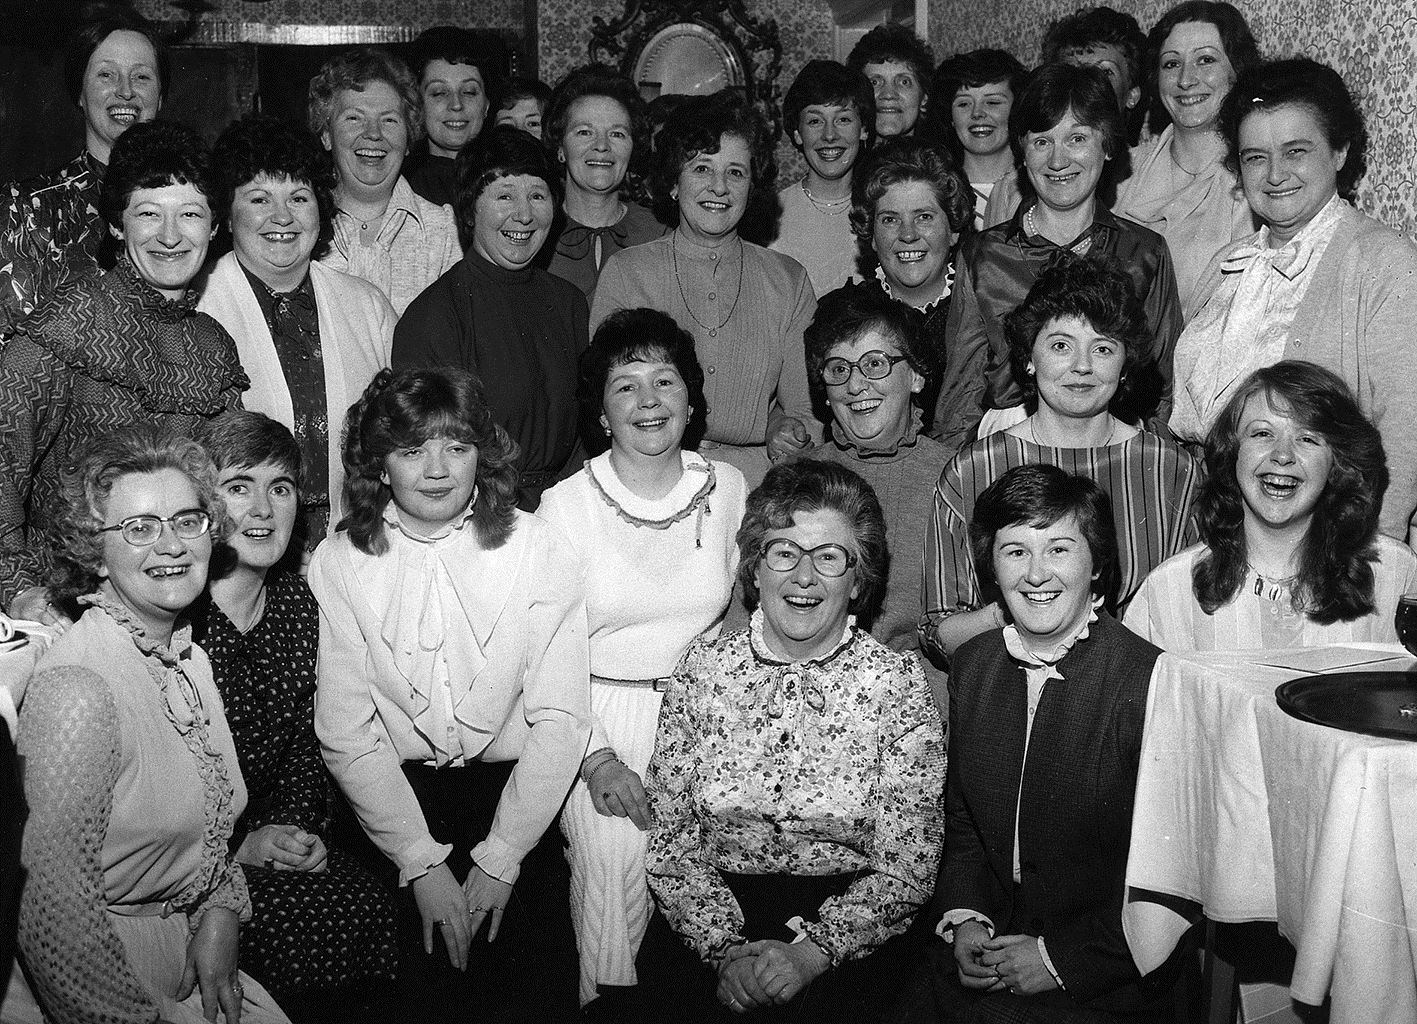 The staff of the Telephone Exchange at a party in May 1983 to mark the retirement of Nora Davidson. Back, from the left: Chrissie Sutherland, Cath MacKenzie, Gillean Mackay, Linda Gray, Dorothy Harvey, Eileen Dunbar, Rita Eddy, Beth Chisholm, Yvonne MacKenzie, Elaine Blackhall; middle: Christine MacKenzie, Cheryl Ferguson, Mary Mackay, Anne Cameron, Ena MacBean, Marjory Macdonald, May Corsar; front: Chris Bruce, Anne MacIver, Lorraine McBeath, Christine Williamson, Nora Davidson, Chrissie Harper, Fiona Donaldson, Effie Park, Audrey Donnelly.